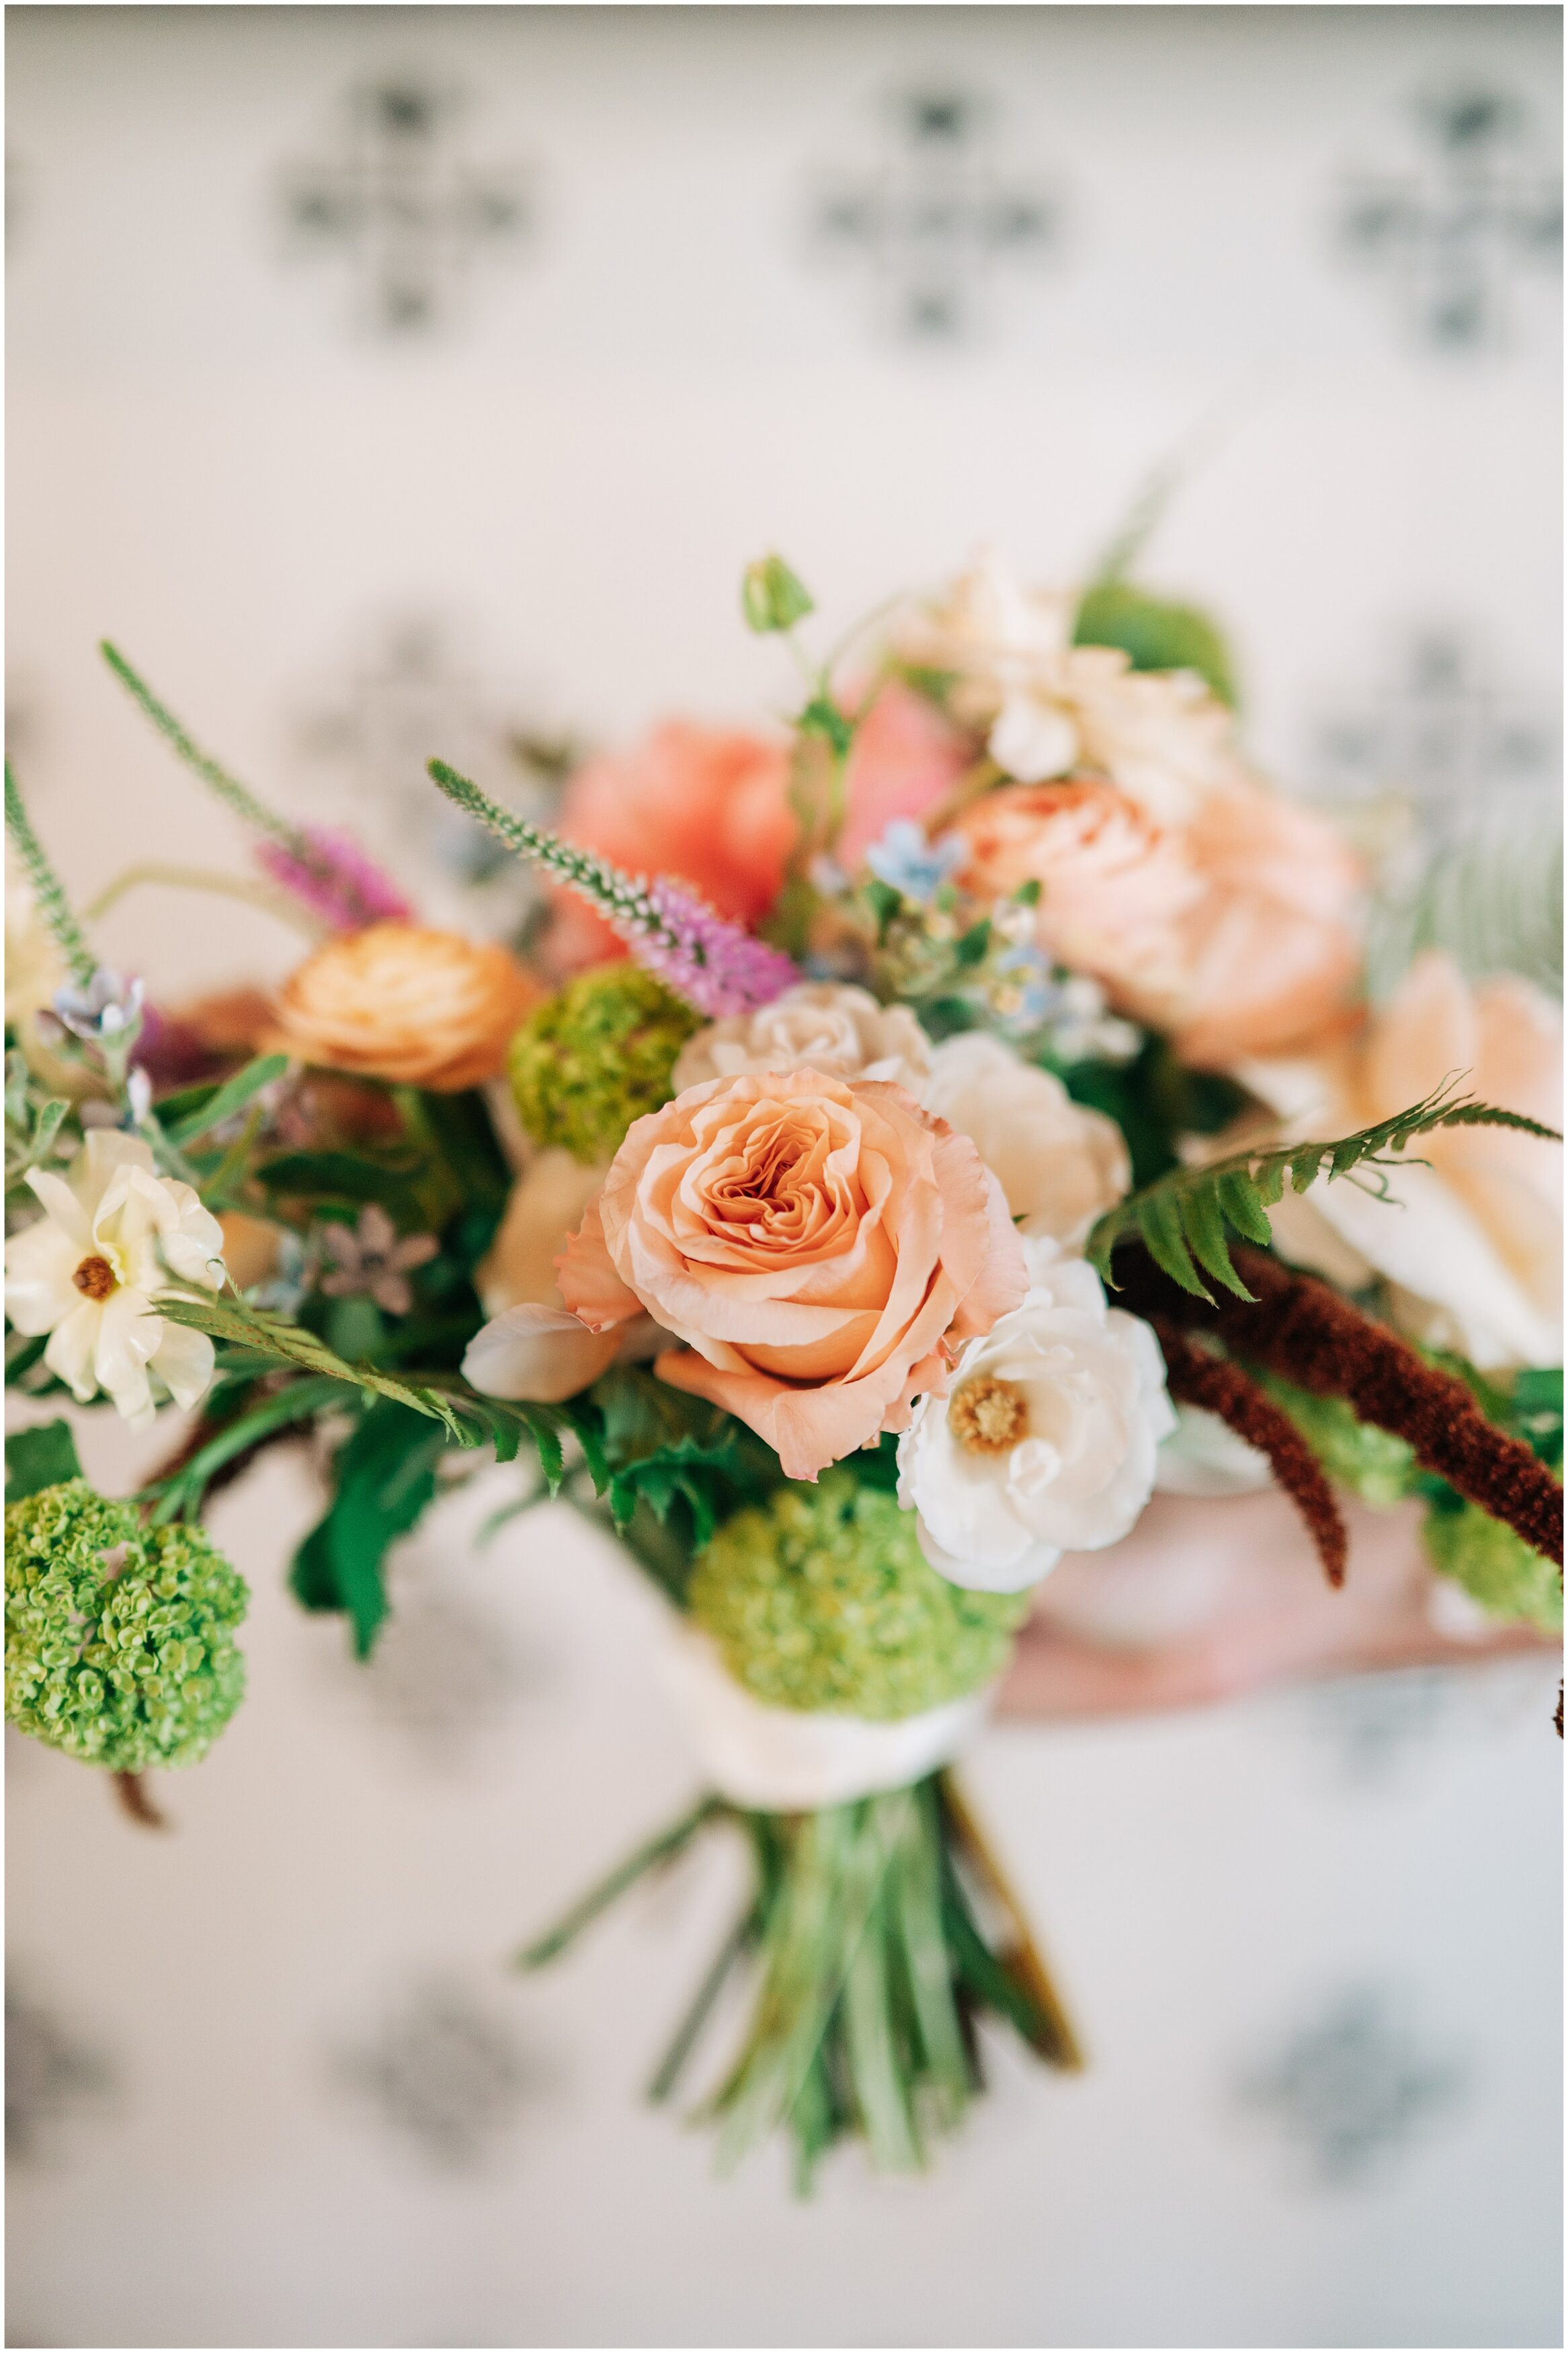 Lavish Floral Design created a beautiful spring bouquet with roses, ranunculus,  ferns, and other colorful florals for a spring wedding. Photo by Anna Brace, an Omaha Nebraska Wedding Photographer.